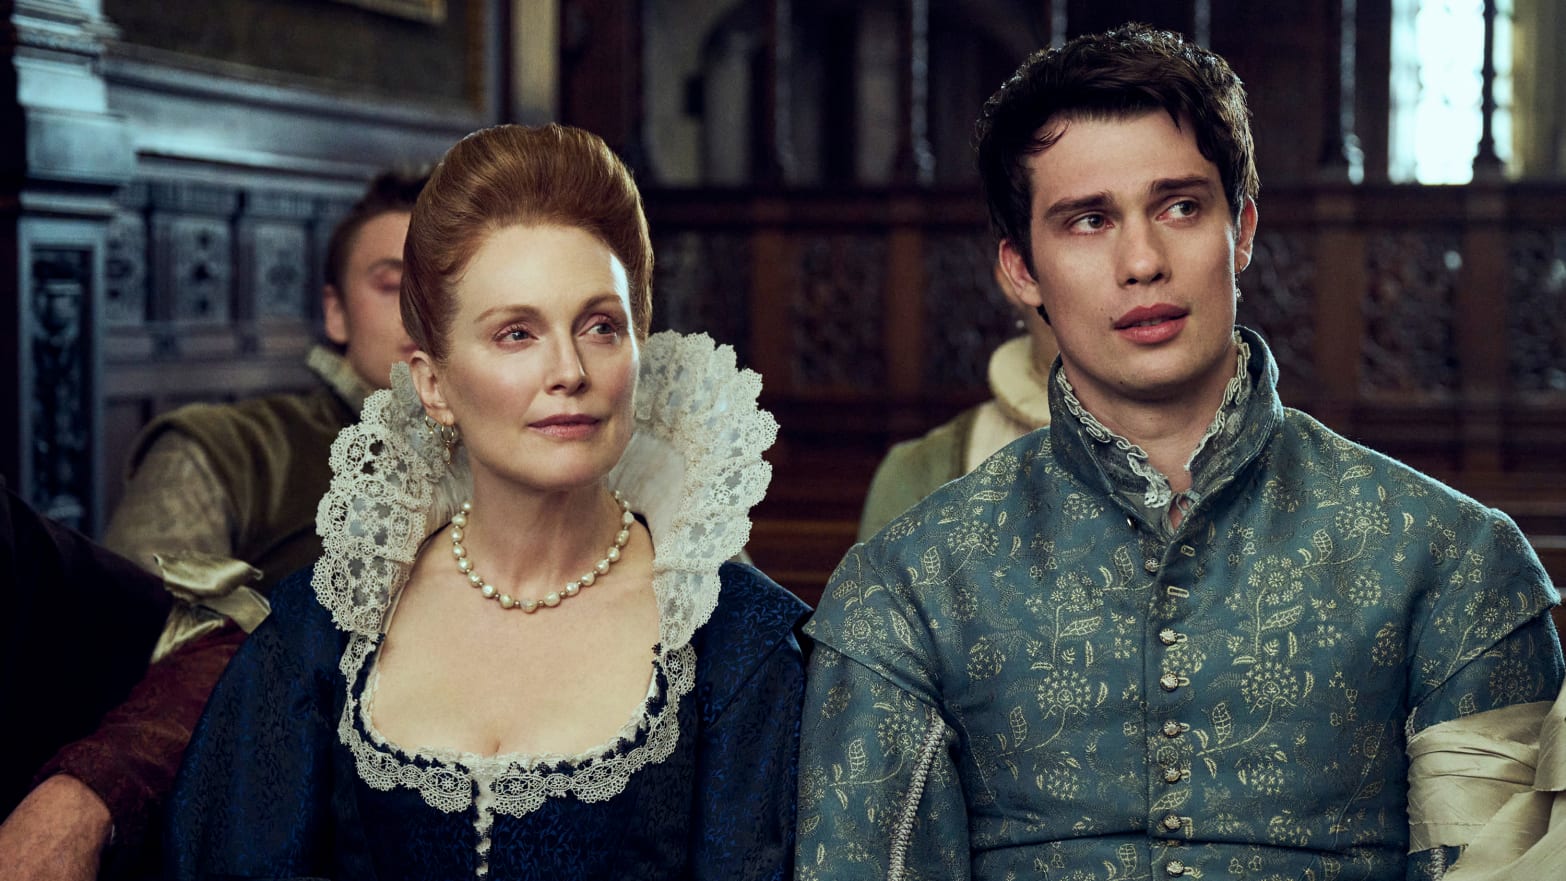 Julianne Moore and Nicholas Galitzine in the series ‘Mary & George’ on Starz